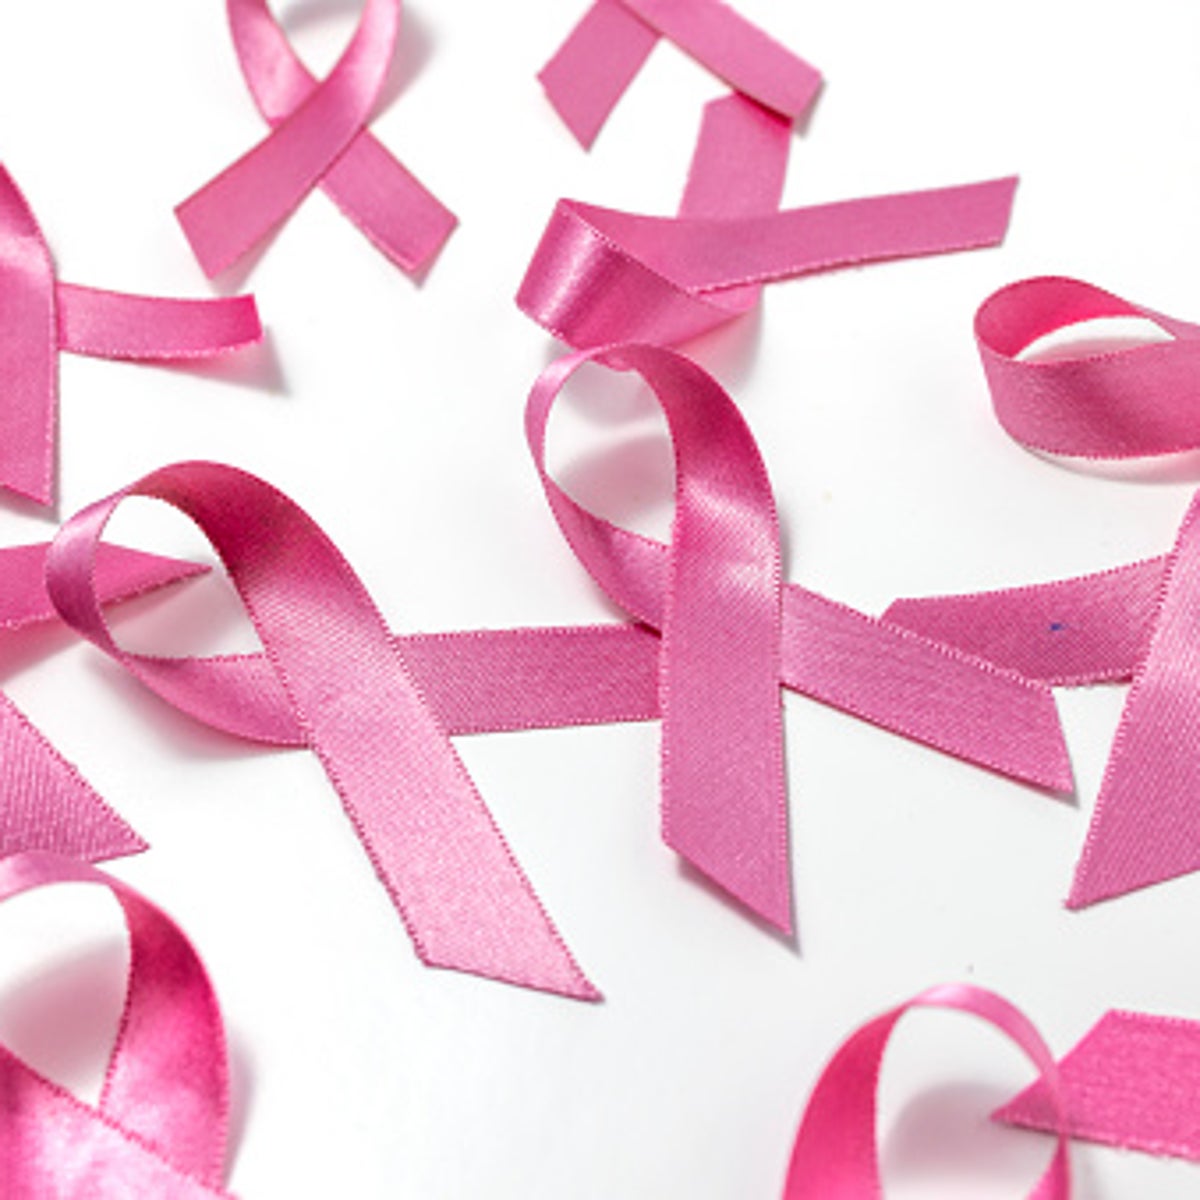 Why October is Breast Cancer Awareness Month - and why we wear pink ribbons